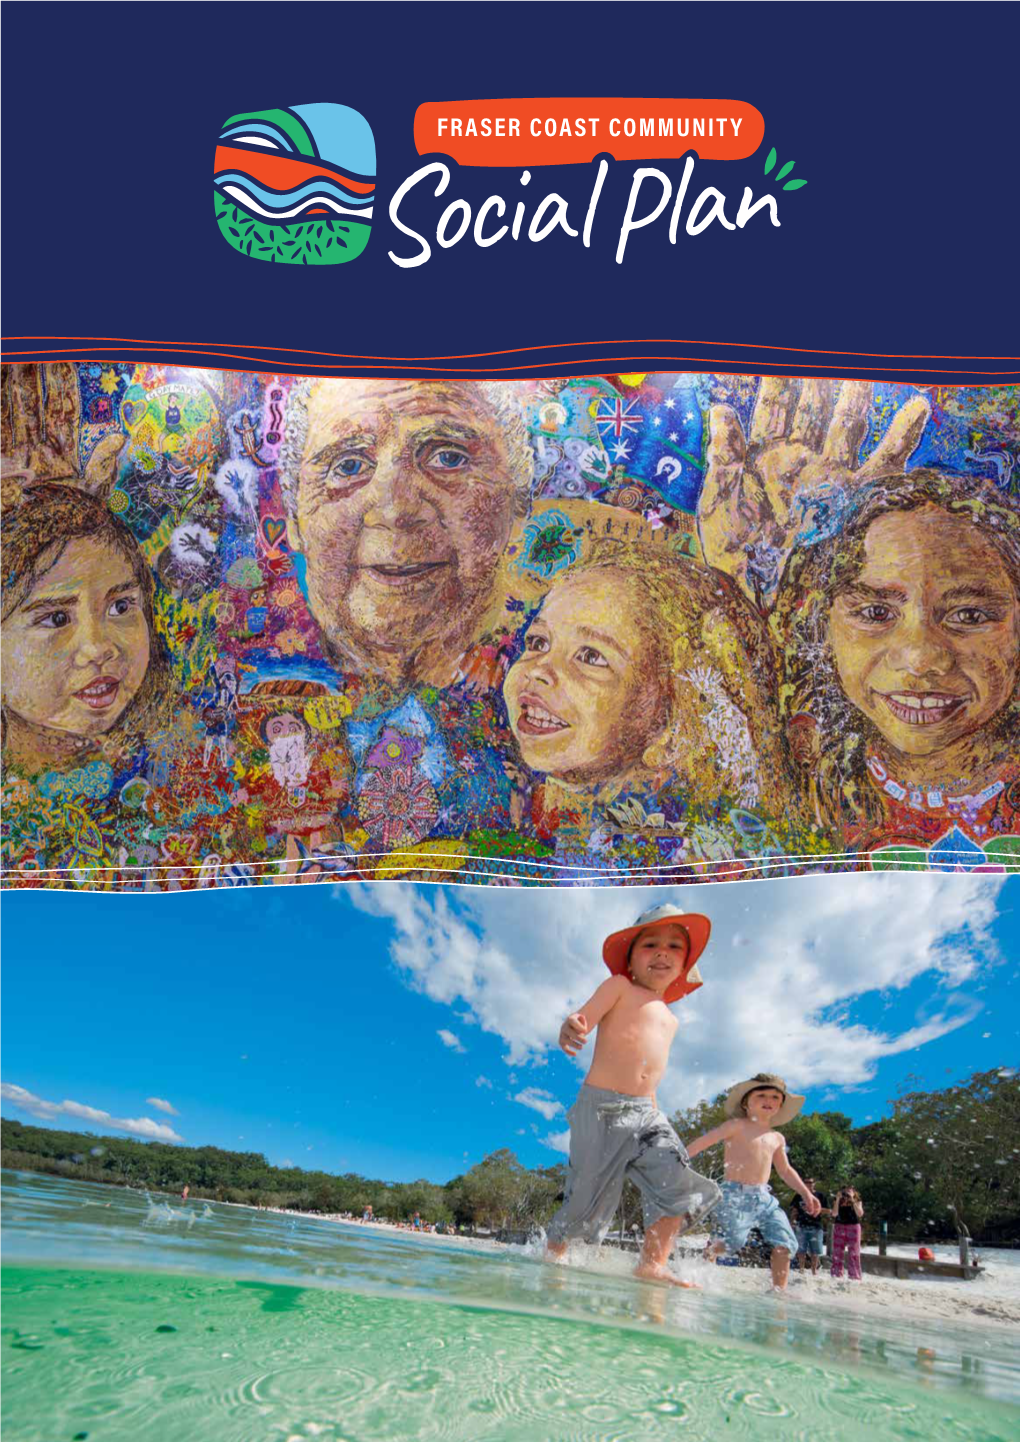 Fraser Coast Community Social Plan 2018-2025 1 the Wealth of Knowledge and Vast Life Experiences of People “ in Our Community Really Contribute to Our Quality of Life